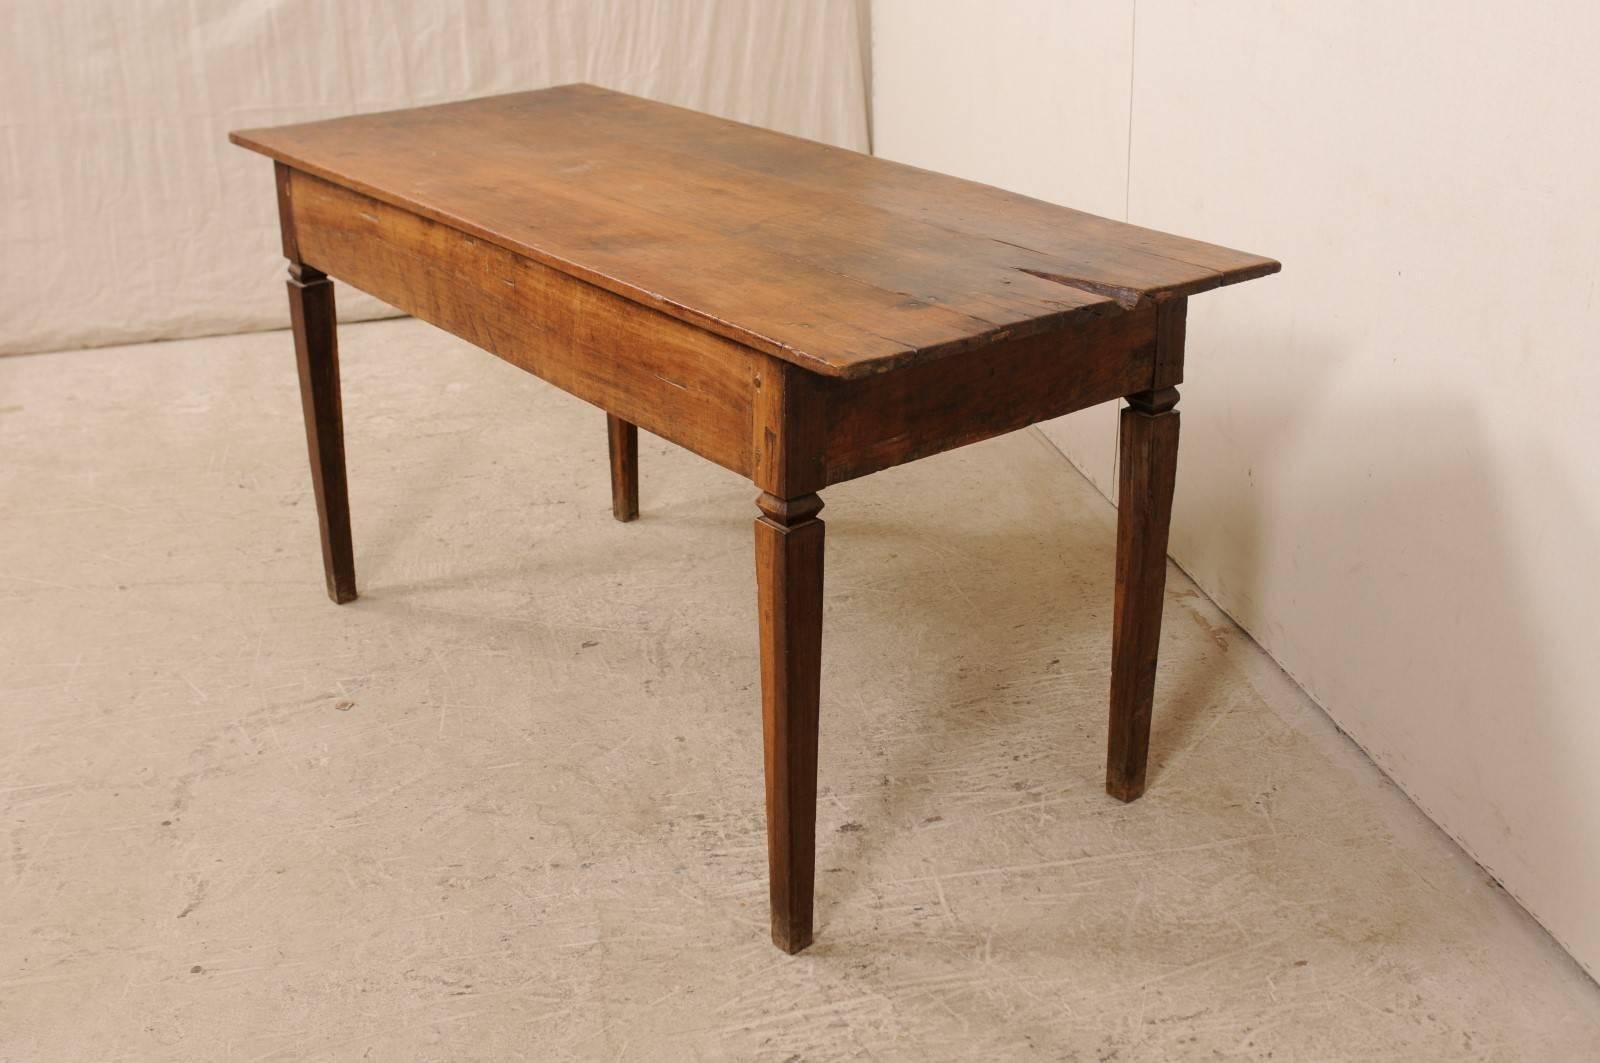 Rustic Brazilian 19th Century Carved Peroba Wood Table with Elegant Tapered Legs